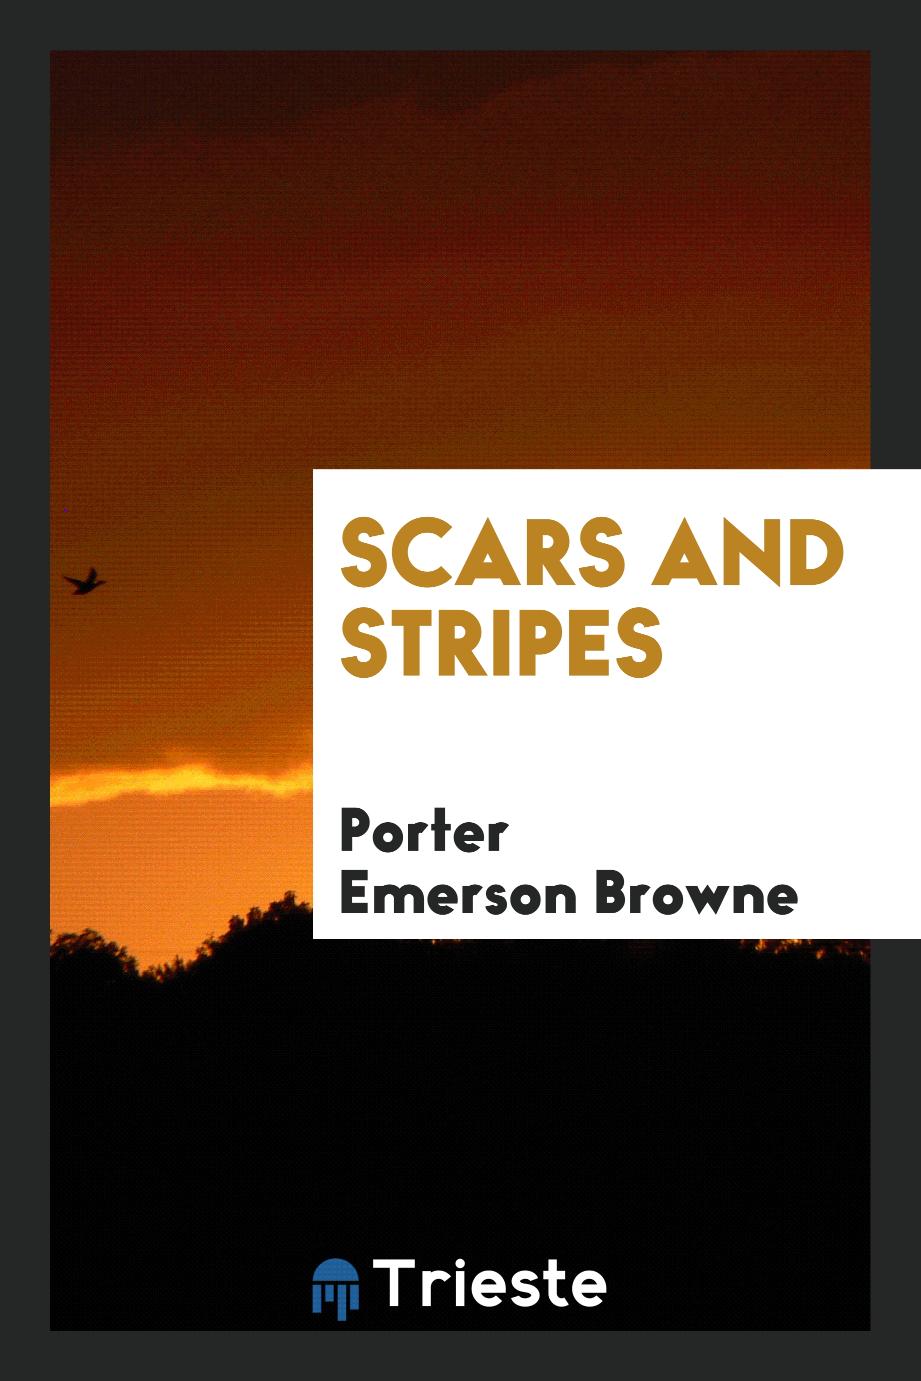 Scars and stripes